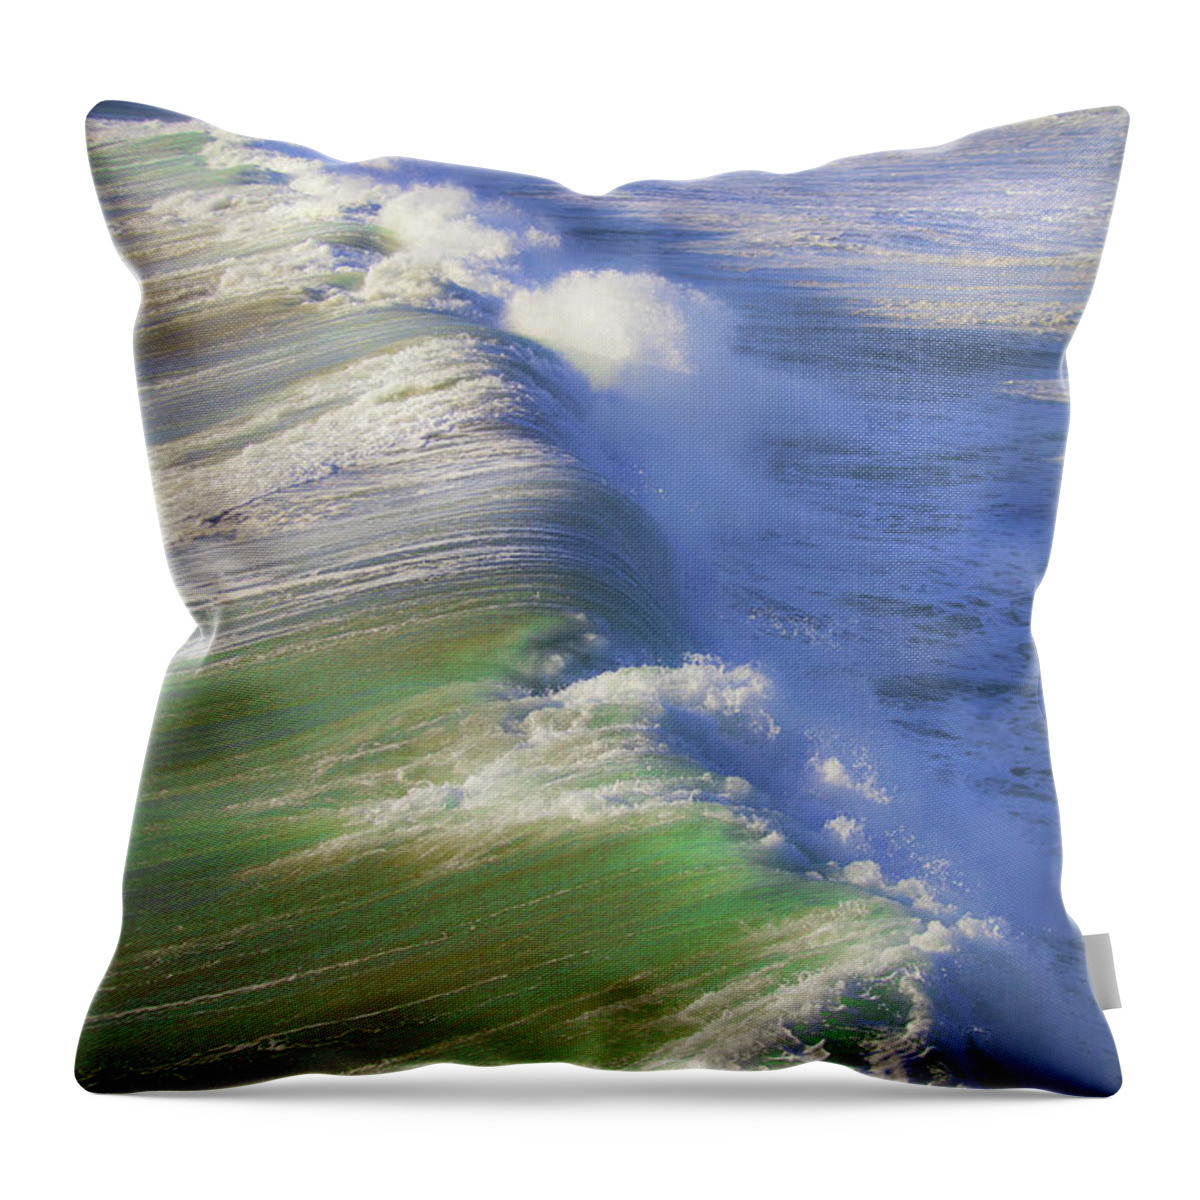 Waves Breaking Beach Original Fine Art Photography Throw Pillow featuring the photograph Breaking Waves by Jerry Cowart